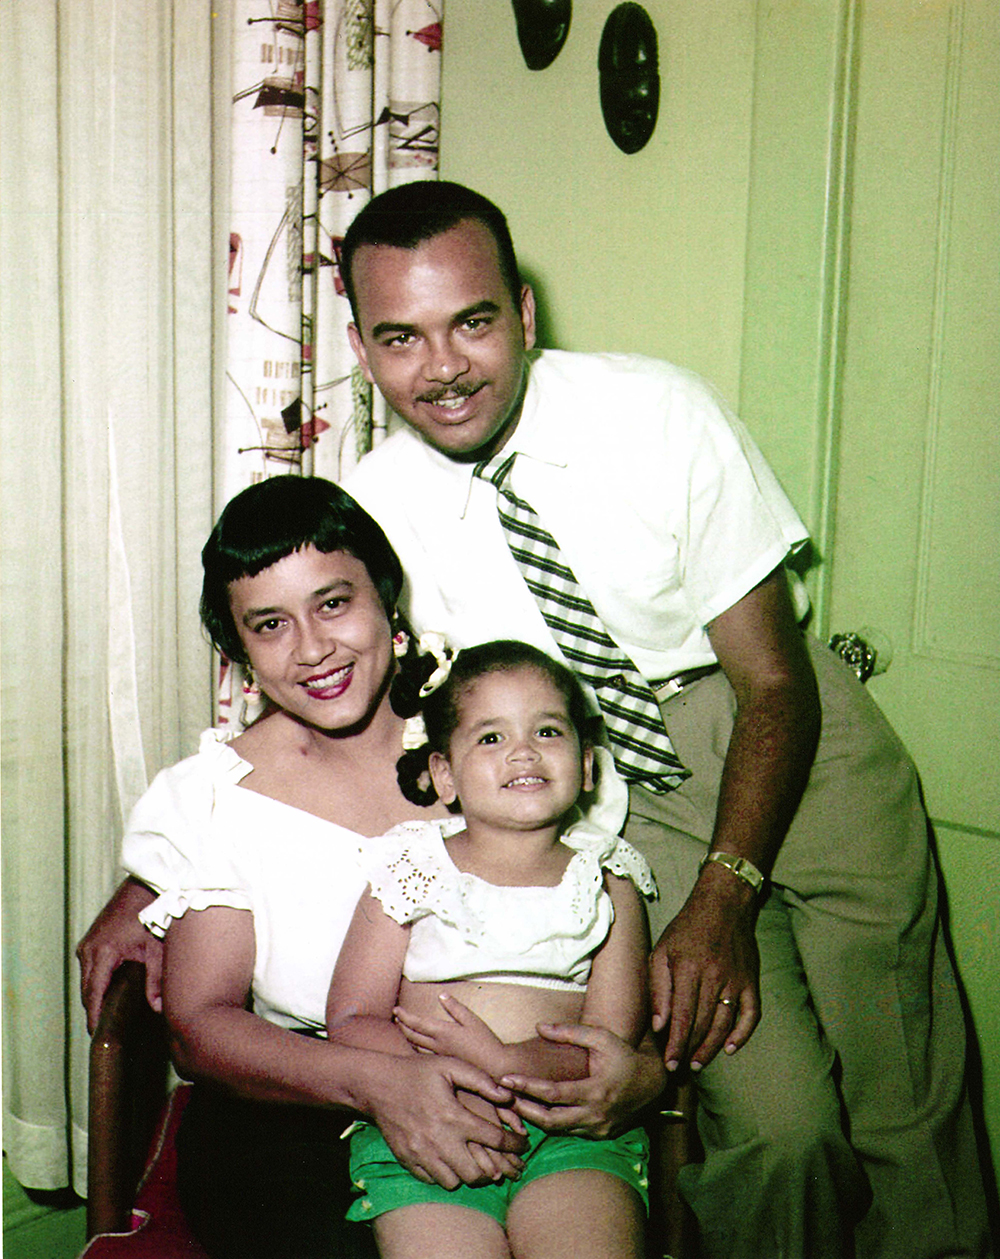 Cheryl with her parents in a photo taken by Ed Hubbard at his home in 1955.